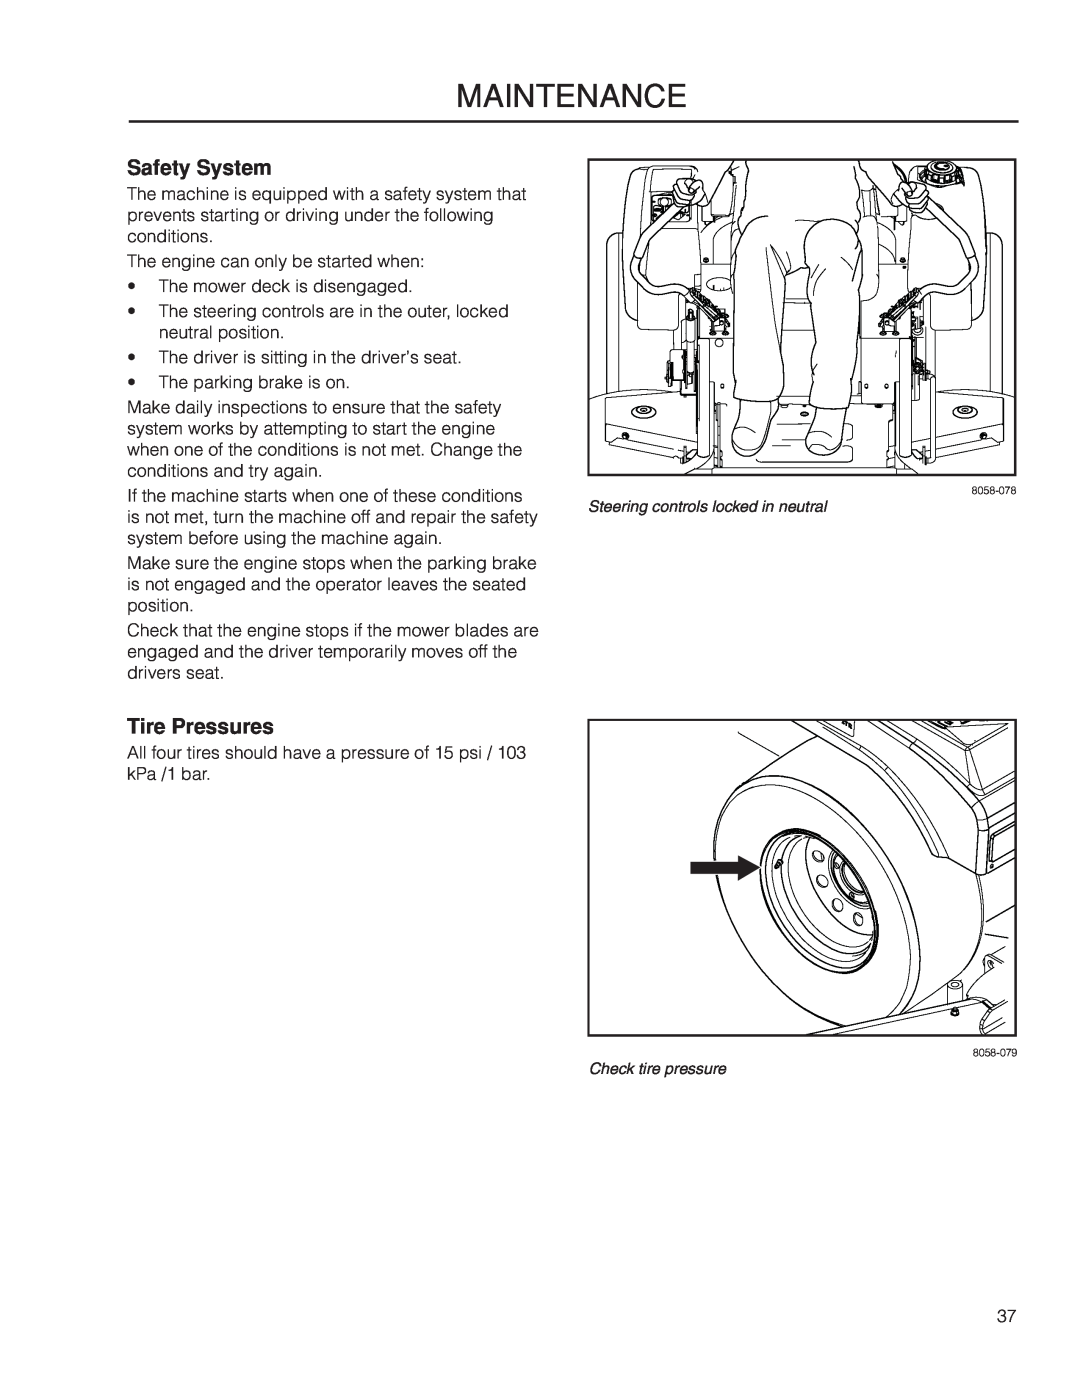 McCulloch 966564101, ZM4619 manual Safety System, Tire Pressures, Maintenance 